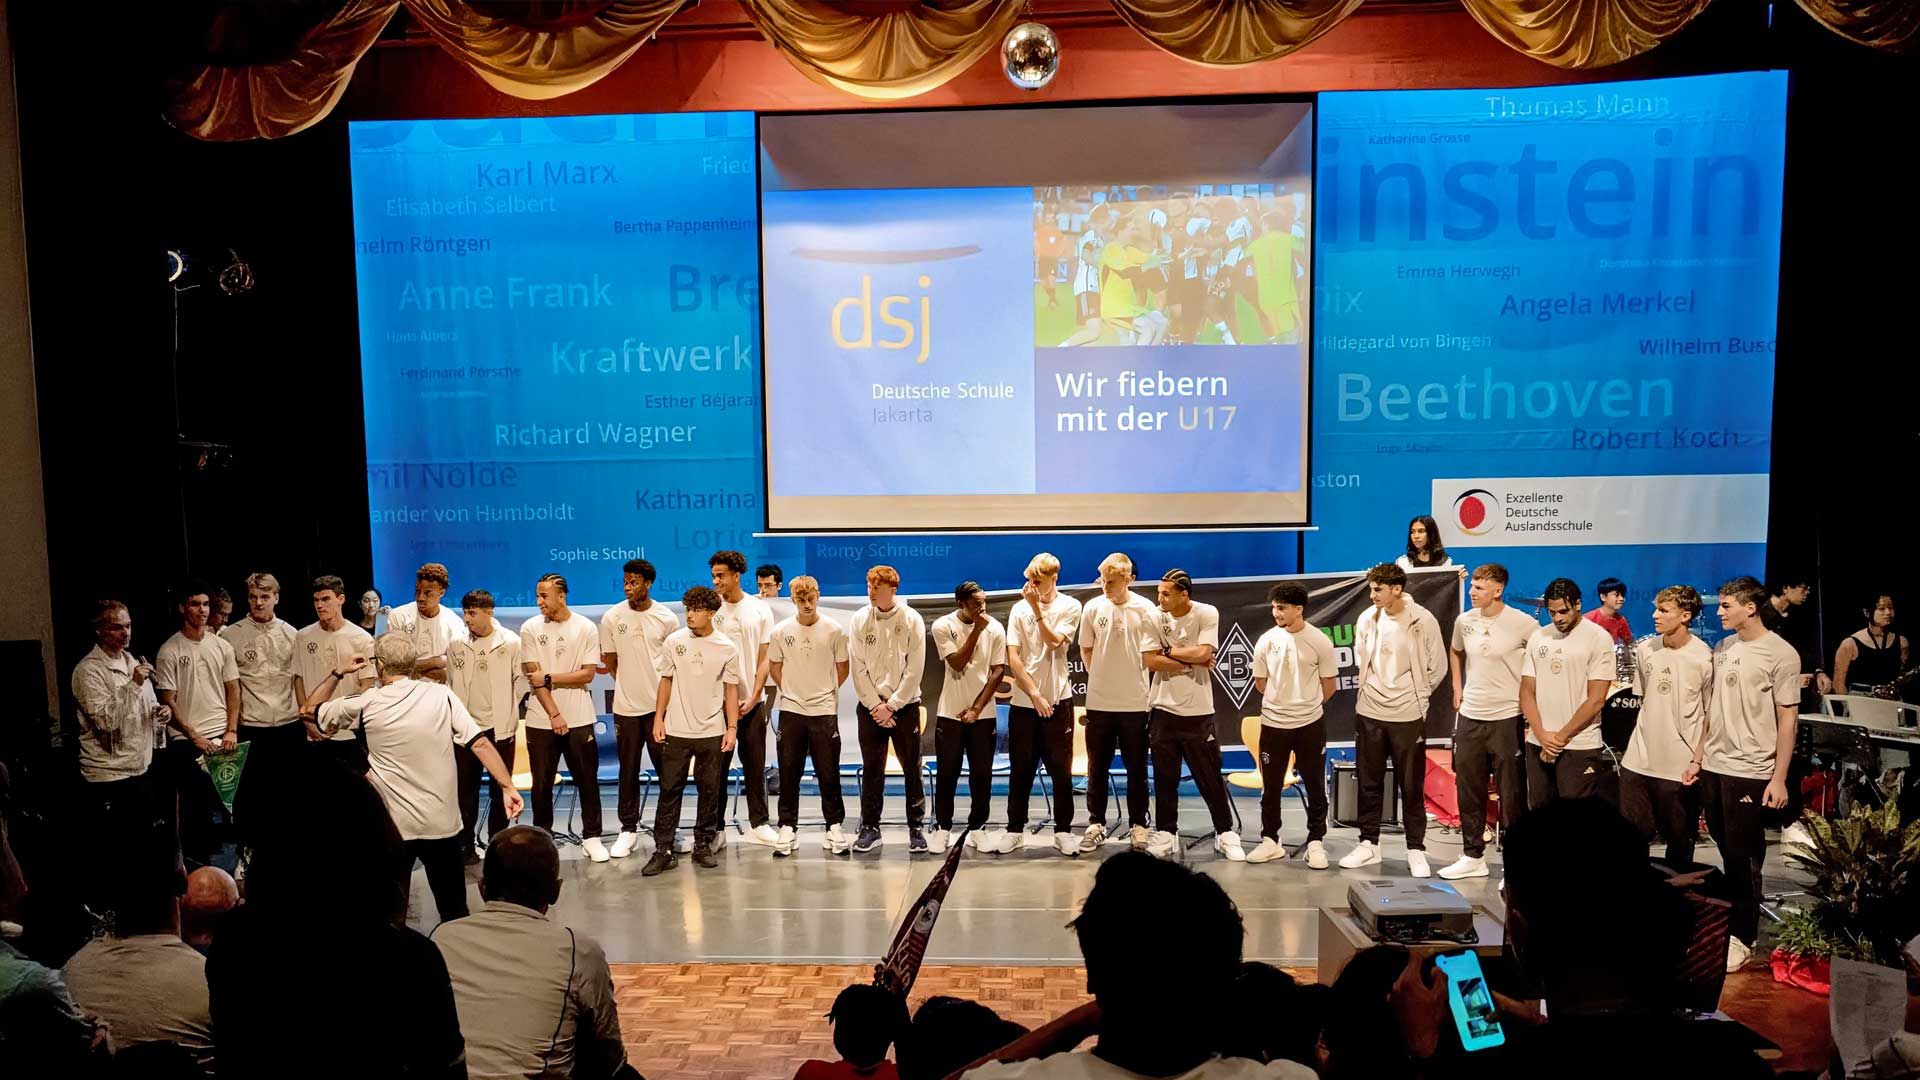 Reigning FIFA U17 European Champions Germany on stage at the German School Jakarta